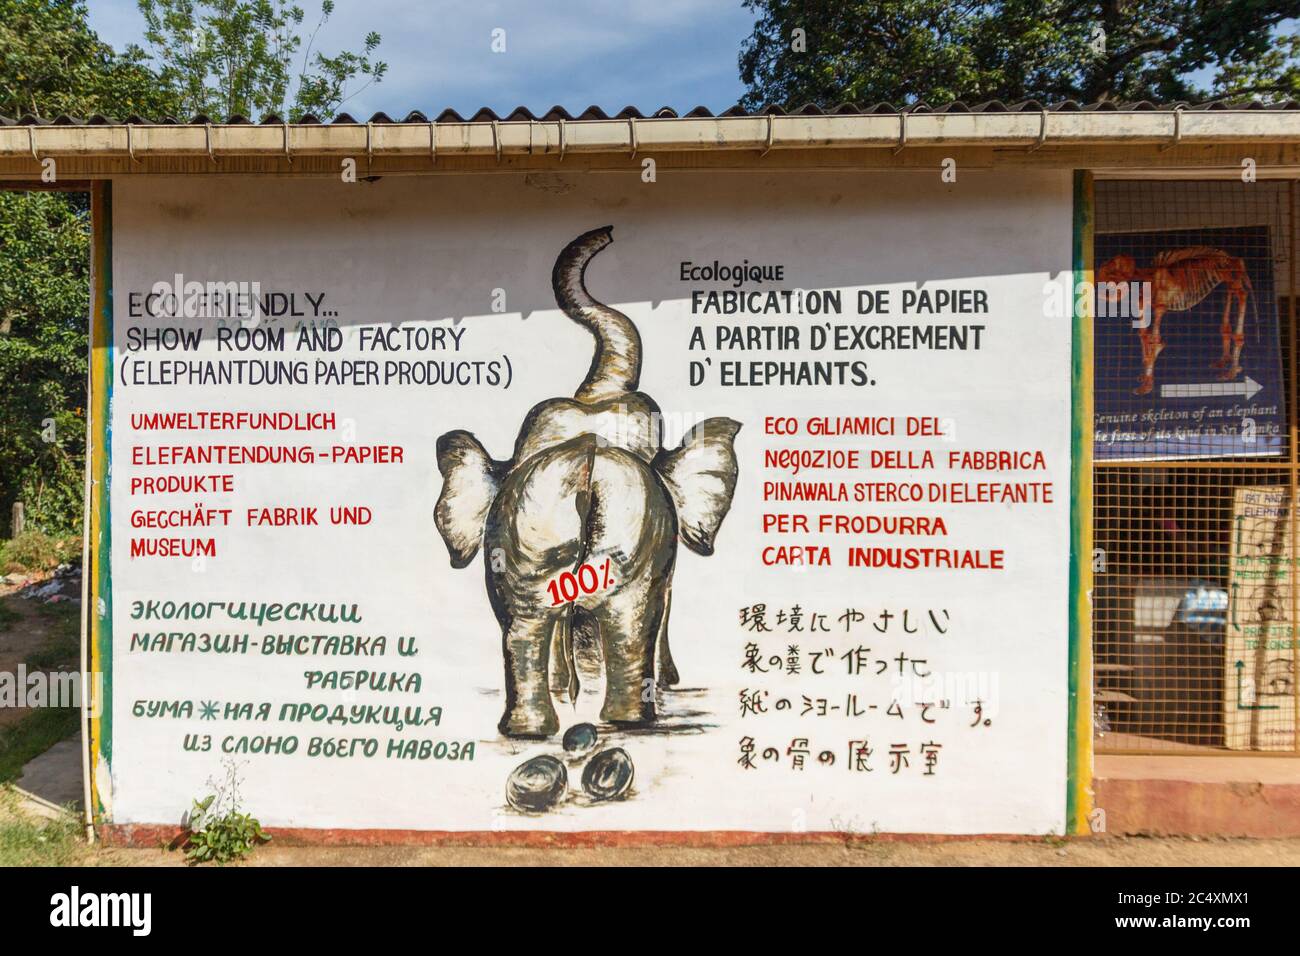 SRI LANKA - Circa 2014: Promotional wall for a small local factory that is crating eco friendly paper from elephant dung. Concept of eco bio planet fr Stock Photo